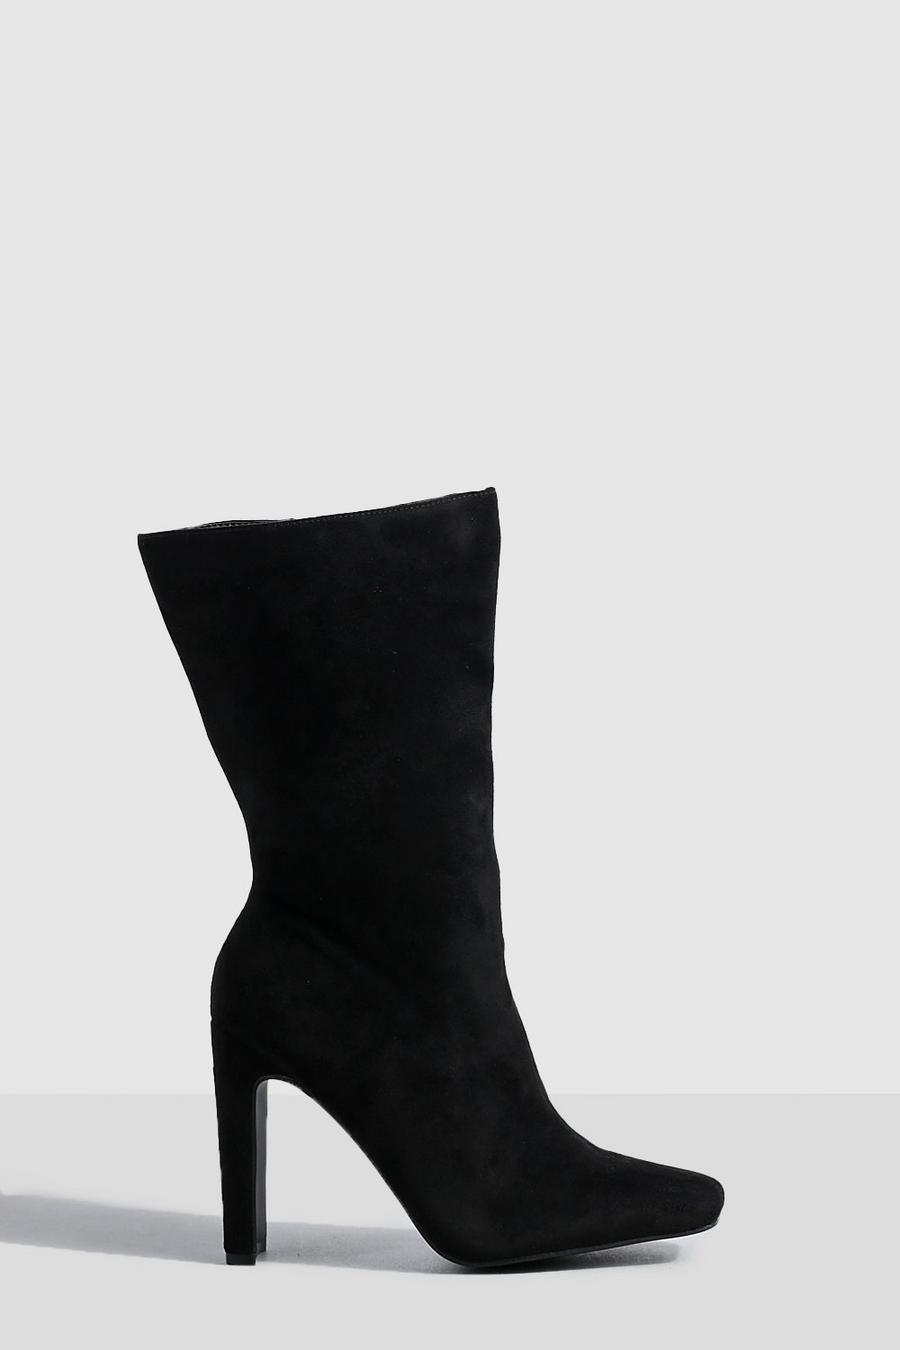 Black Wide Width Flat Heel Faux Suede Calf High Boots image number 1